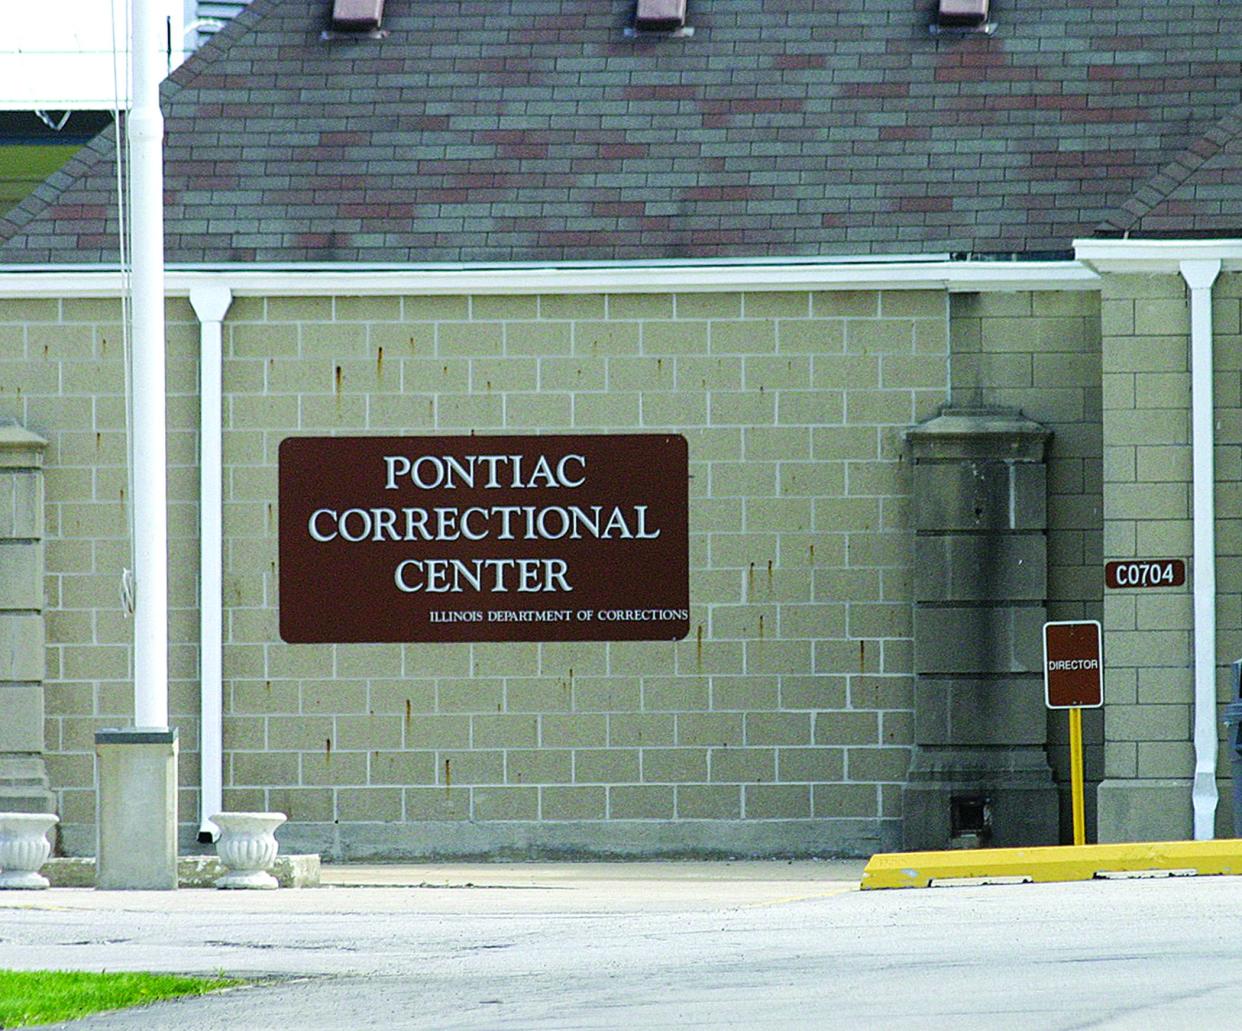 Two correctional officers were attacked by inmates at Pontiac Correctional Center Wednesday morning, according to AFSCME Local 494 President William Lee.